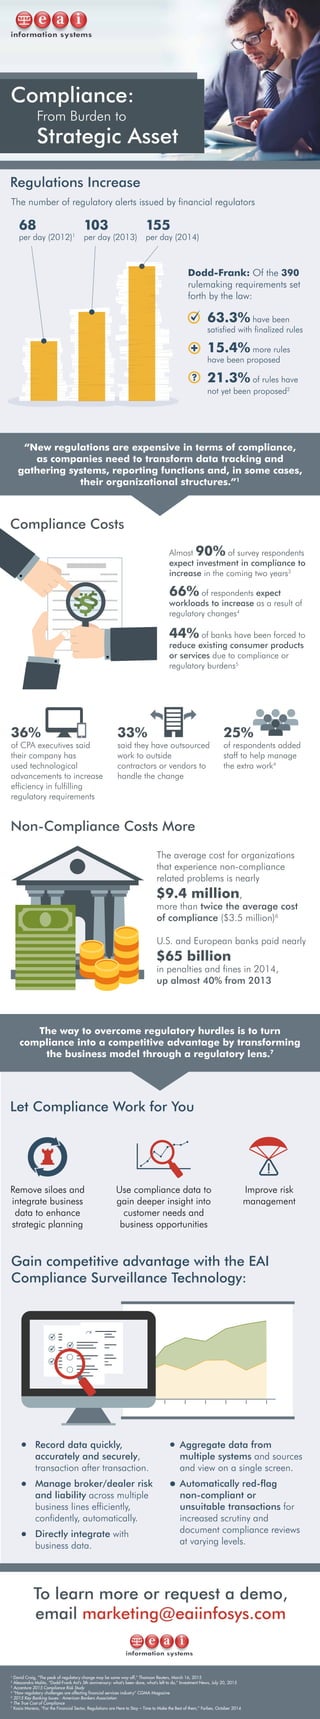 Compliance:
From Burden to
Regulations Increase
Compliance Costs
Non-Compliance Costs More
Let Compliance Work for You
Strategic Asset
The number of regulatory alerts issued by financial regulators
Almost 90% of survey respondents
expect investment in compliance to
increase in the coming two years3
44% of banks have been forced to
reduce existing consumer products
or services due to compliance or
regulatory burdens5
The average cost for organizations
that experience non-compliance
related problems is nearly
$9.4 million,
more than twice the average cost
of compliance ($3.5 million)6
U.S. and European banks paid nearly
$65 billion
in penalties and fines in 2014,
up almost 40% from 2013
66% of respondents expect
workloads to increase as a result of
regulatory changes4
63.3% have been
satisfied with finalized rules
15.4% more rules
have been proposed
21.3% of rules have
not yet been proposed2
“New regulations are expensive in terms of compliance,
as companies need to transform data tracking and
gathering systems, reporting functions and, in some cases,
their organizational structures.”1
The way to overcome regulatory hurdles is to turn
compliance into a competitive advantage by transforming
the business model through a regulatory lens.7
68
per day (2012)1
155
per day (2014)
103
per day (2013)
Dodd-Frank: Of the 390
rulemaking requirements set
forth by the law:
Record data quickly,
accurately and securely,
transaction after transaction.
Manage broker/dealer risk
and liability across multiple
business lines efficiently,
confidently, automatically.
Directly integrate with
business data.
Aggregate data from
multiple systems and sources
and view on a single screen.
Automatically red-flag
non-compliant or
unsuitable transactions for
increased scrutiny and
document compliance reviews
at varying levels.
36%
of CPA executives said
their company has
used technological
advancements to increase
efficiency in fulfilling
regulatory requirements
33%
said they have outsourced
work to outside
contractors or vendors to
handle the change
25%
of respondents added
staff to help manage
the extra work4
Remove siloes and
integrate business
data to enhance
strategic planning
Use compliance data to
gain deeper insight into
customer needs and
business opportunities
Improve risk
management
Gain competitive advantage with the EAI
Compliance Surveillance Technology:
To learn more or request a demo,
email marketing@eaiinfosys.com
1
David Craig, “The peak of regulatory change may be some way off,” Thomson Reuters, March 16, 2015
2
Alessandra Malito, “Dodd-Frank Act’s 5th anniversary: what’s been done, what’s left to do,” Investment News, July 20, 2015
3
Accenture 2015 Compliance Risk Study
4
“How regulatory challenges are affecting ﬁnancial services industry” CGMA Magazine
5
2015 Key Banking Issues : American Bankers Association
6
The True Cost of Compliance
7
Kasia Moreno, “For the Financial Sector, Regulations are Here to Stay – Time to Make the Best of them,” Forbes, October 2014
 